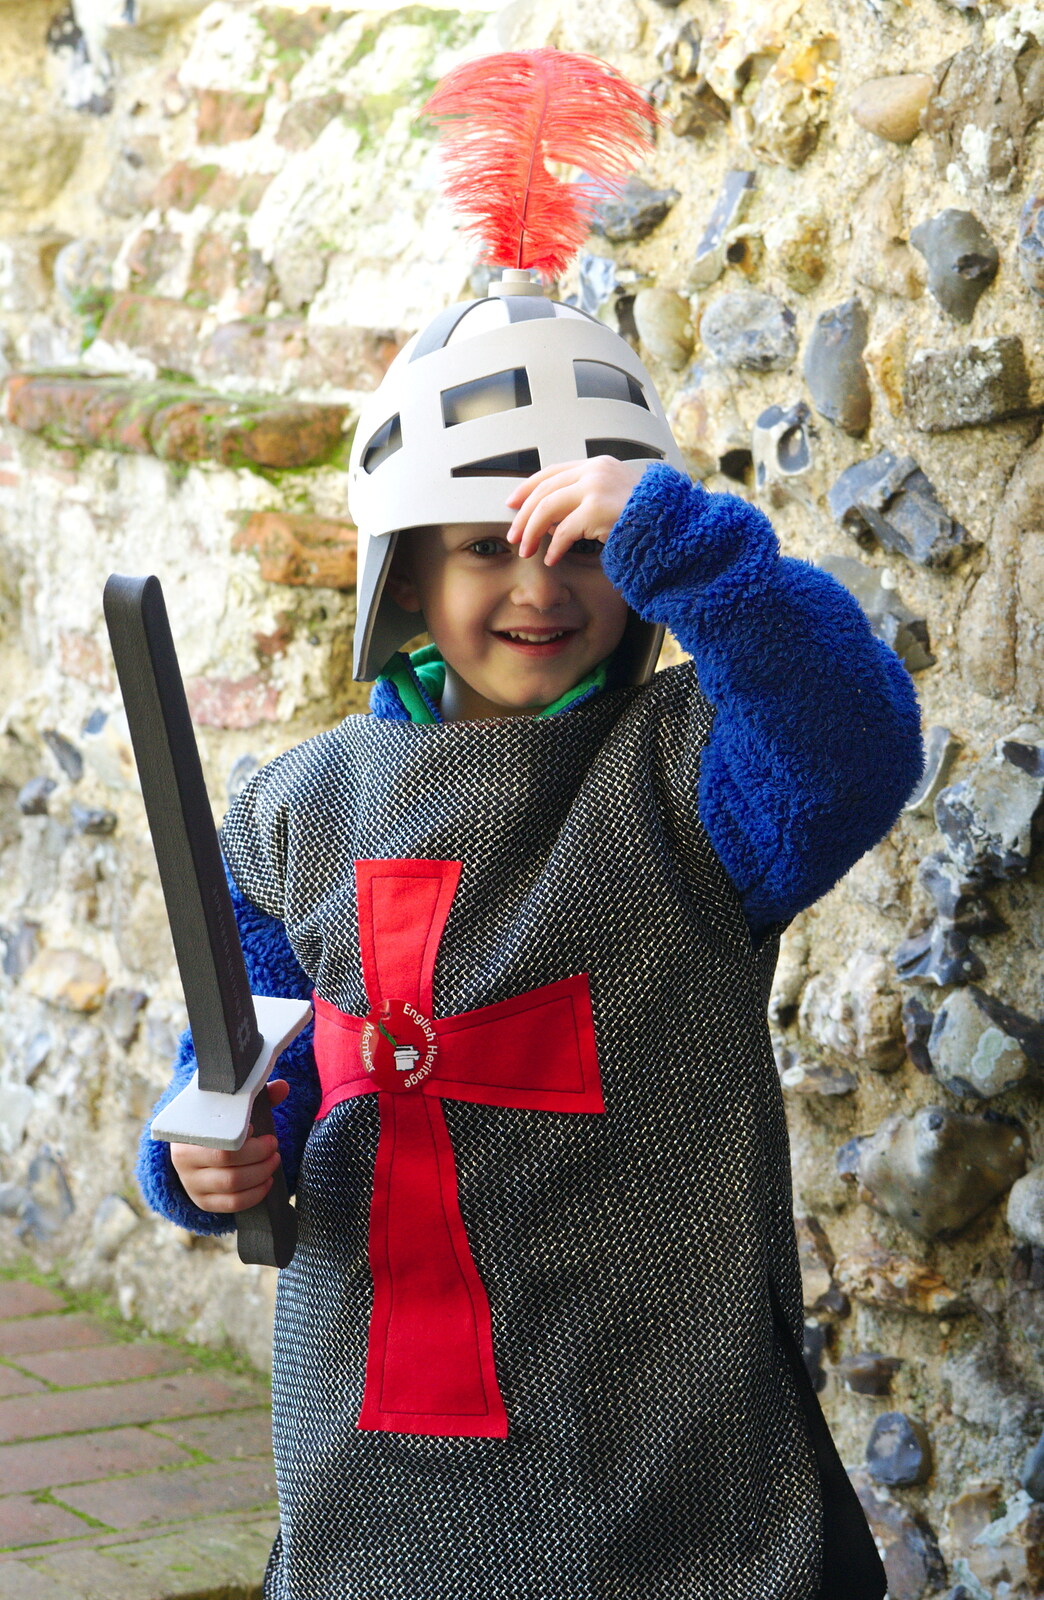 Fred in his knight's costume from A Trip to Framlingham Castle, Framlingham, Suffolk - 16th February 2014